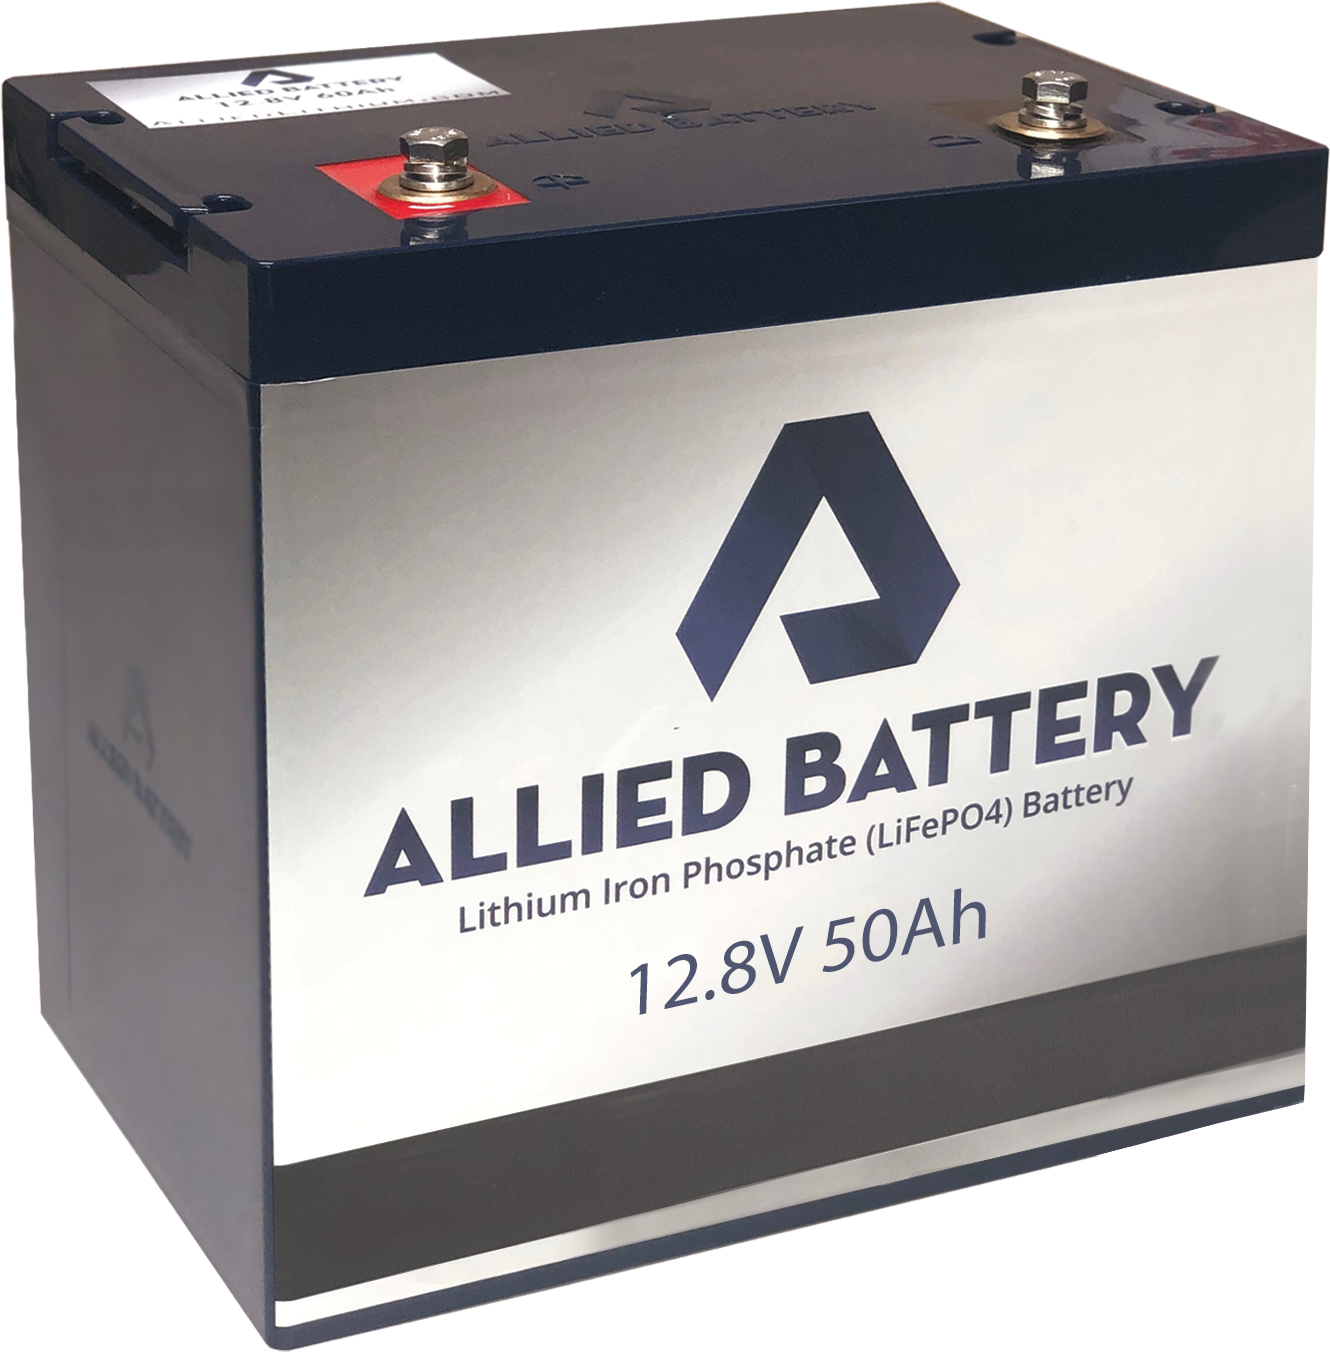 Lithium Iron Phosphate Battery Allied